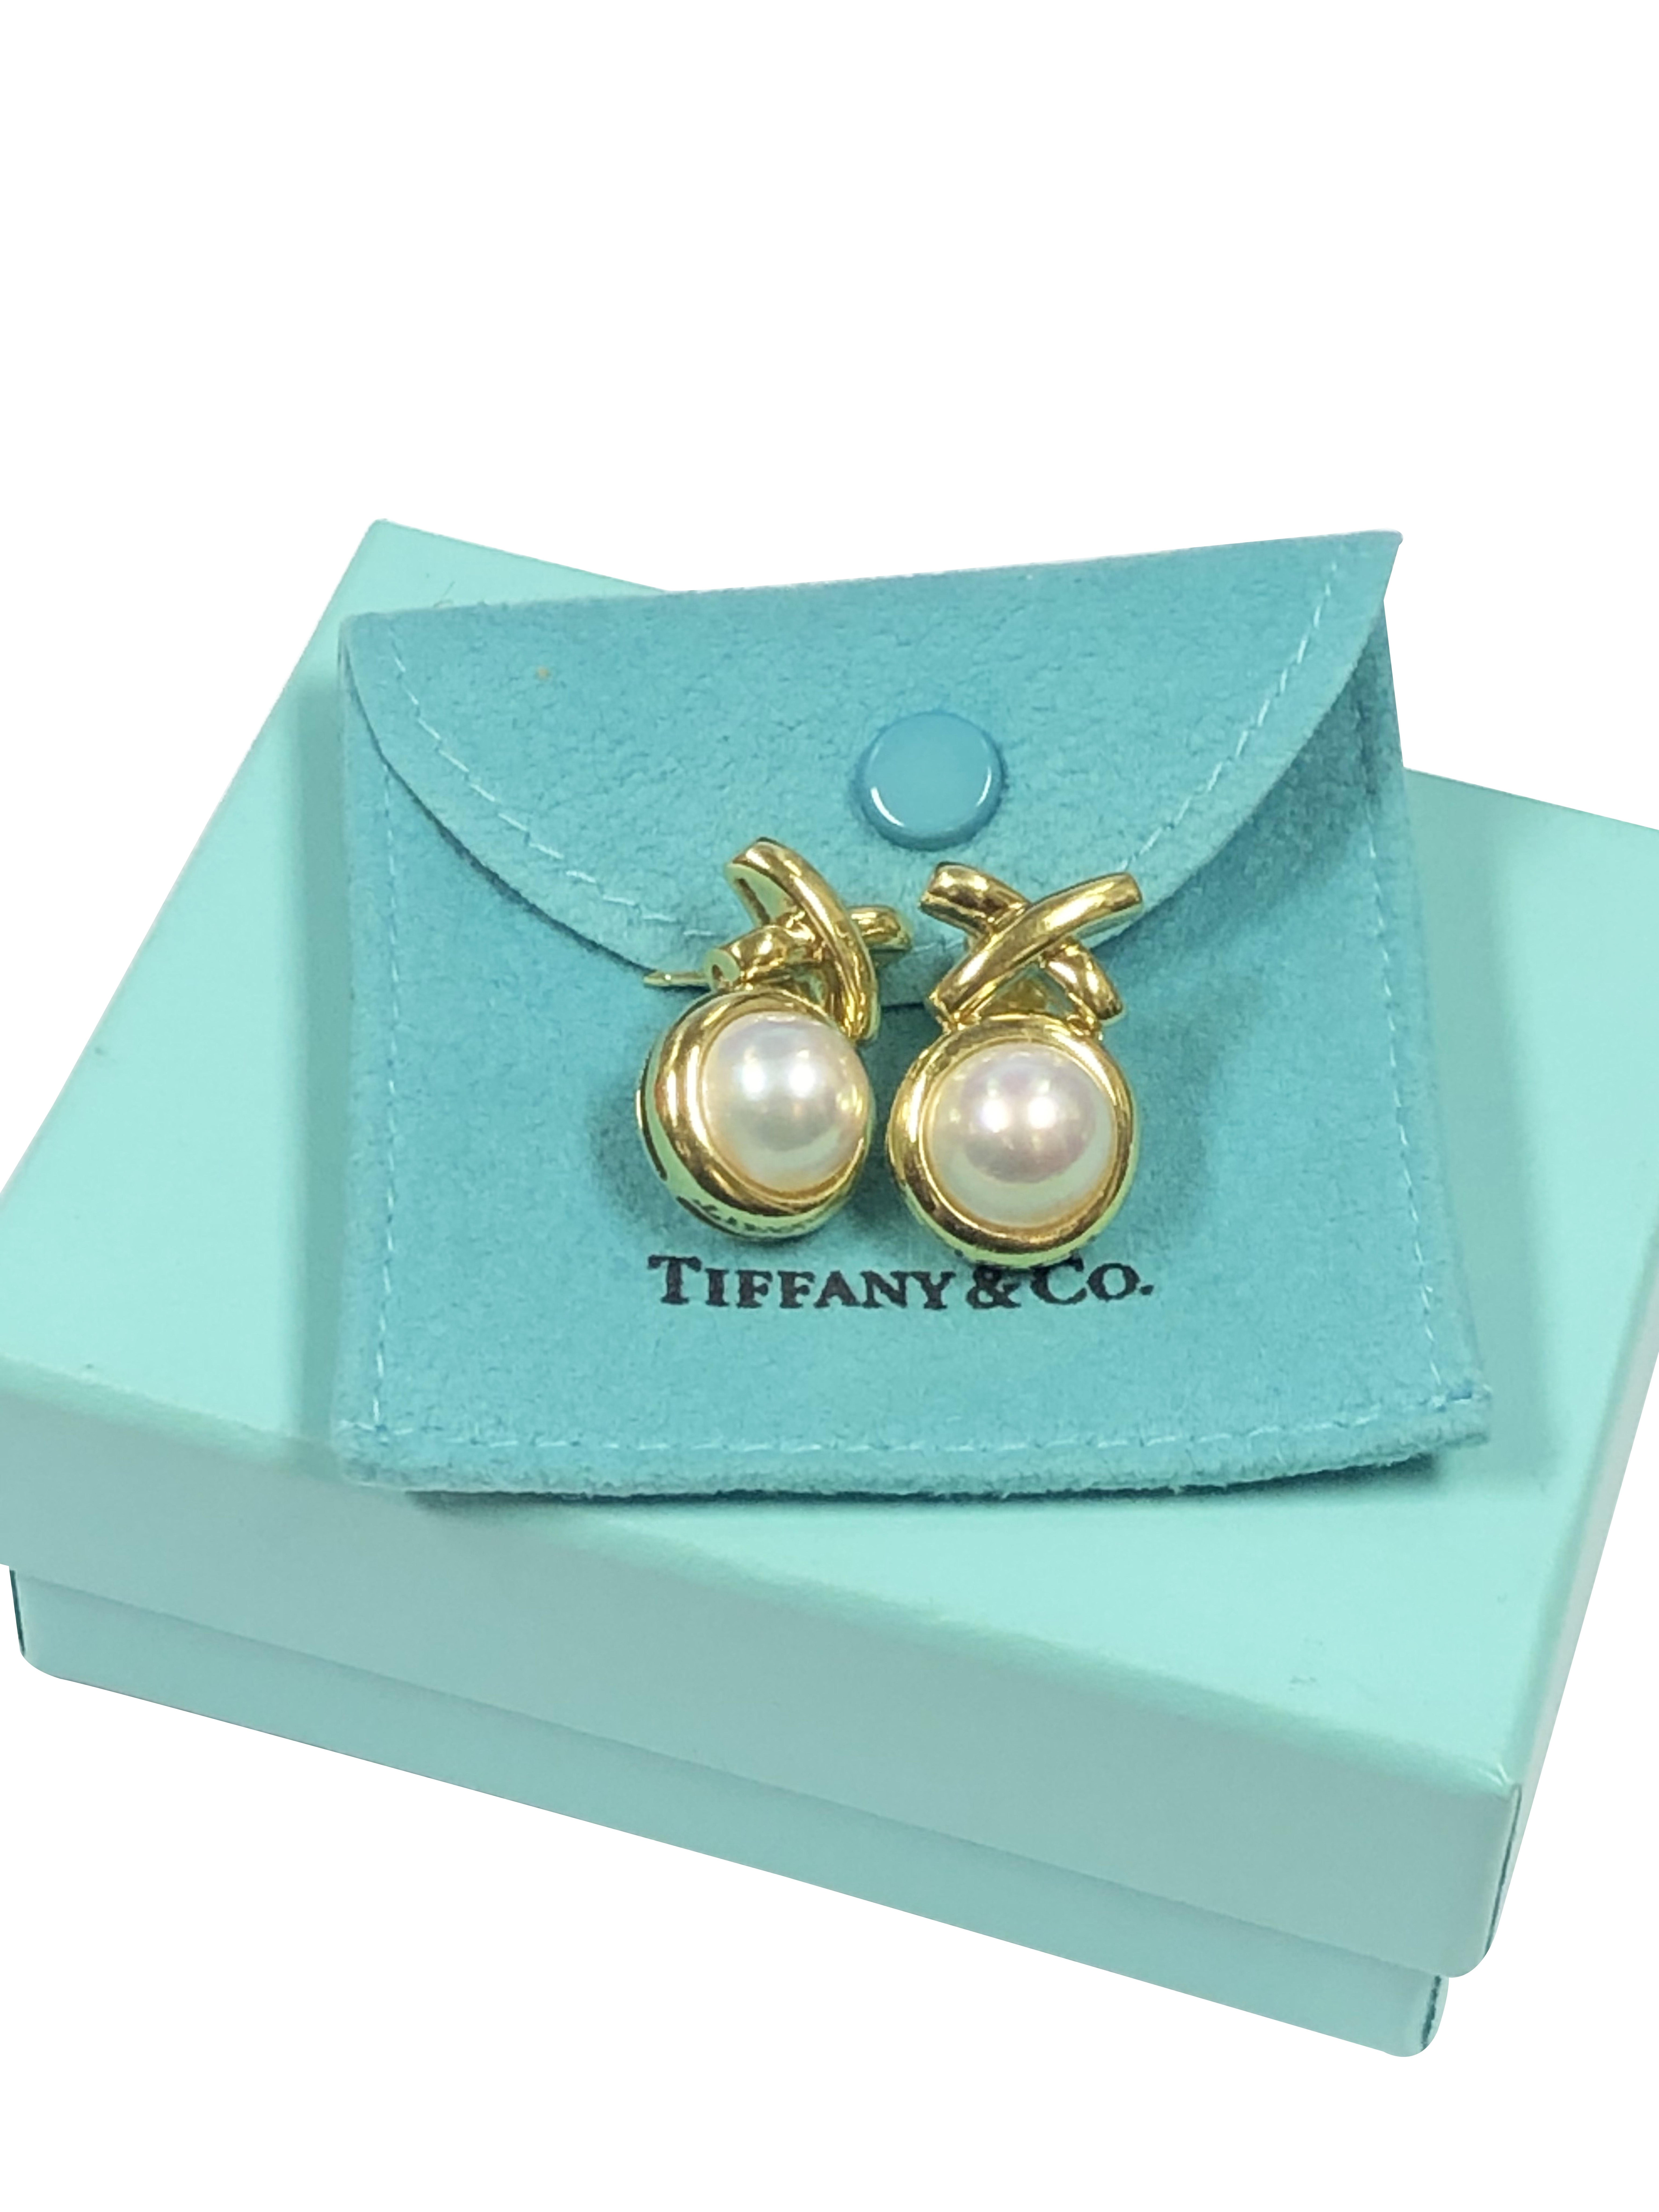 Circa 2010 Paloma Picasso for Tiffany & Company 18K Yellow Gold X collection earrings, measuring 1 inch in length X 5/8 inch wide, set with a 10 M.M. Mabe Pearl of very fine color and luster. Post backs, come in a Tiffany Suede travel pouch and